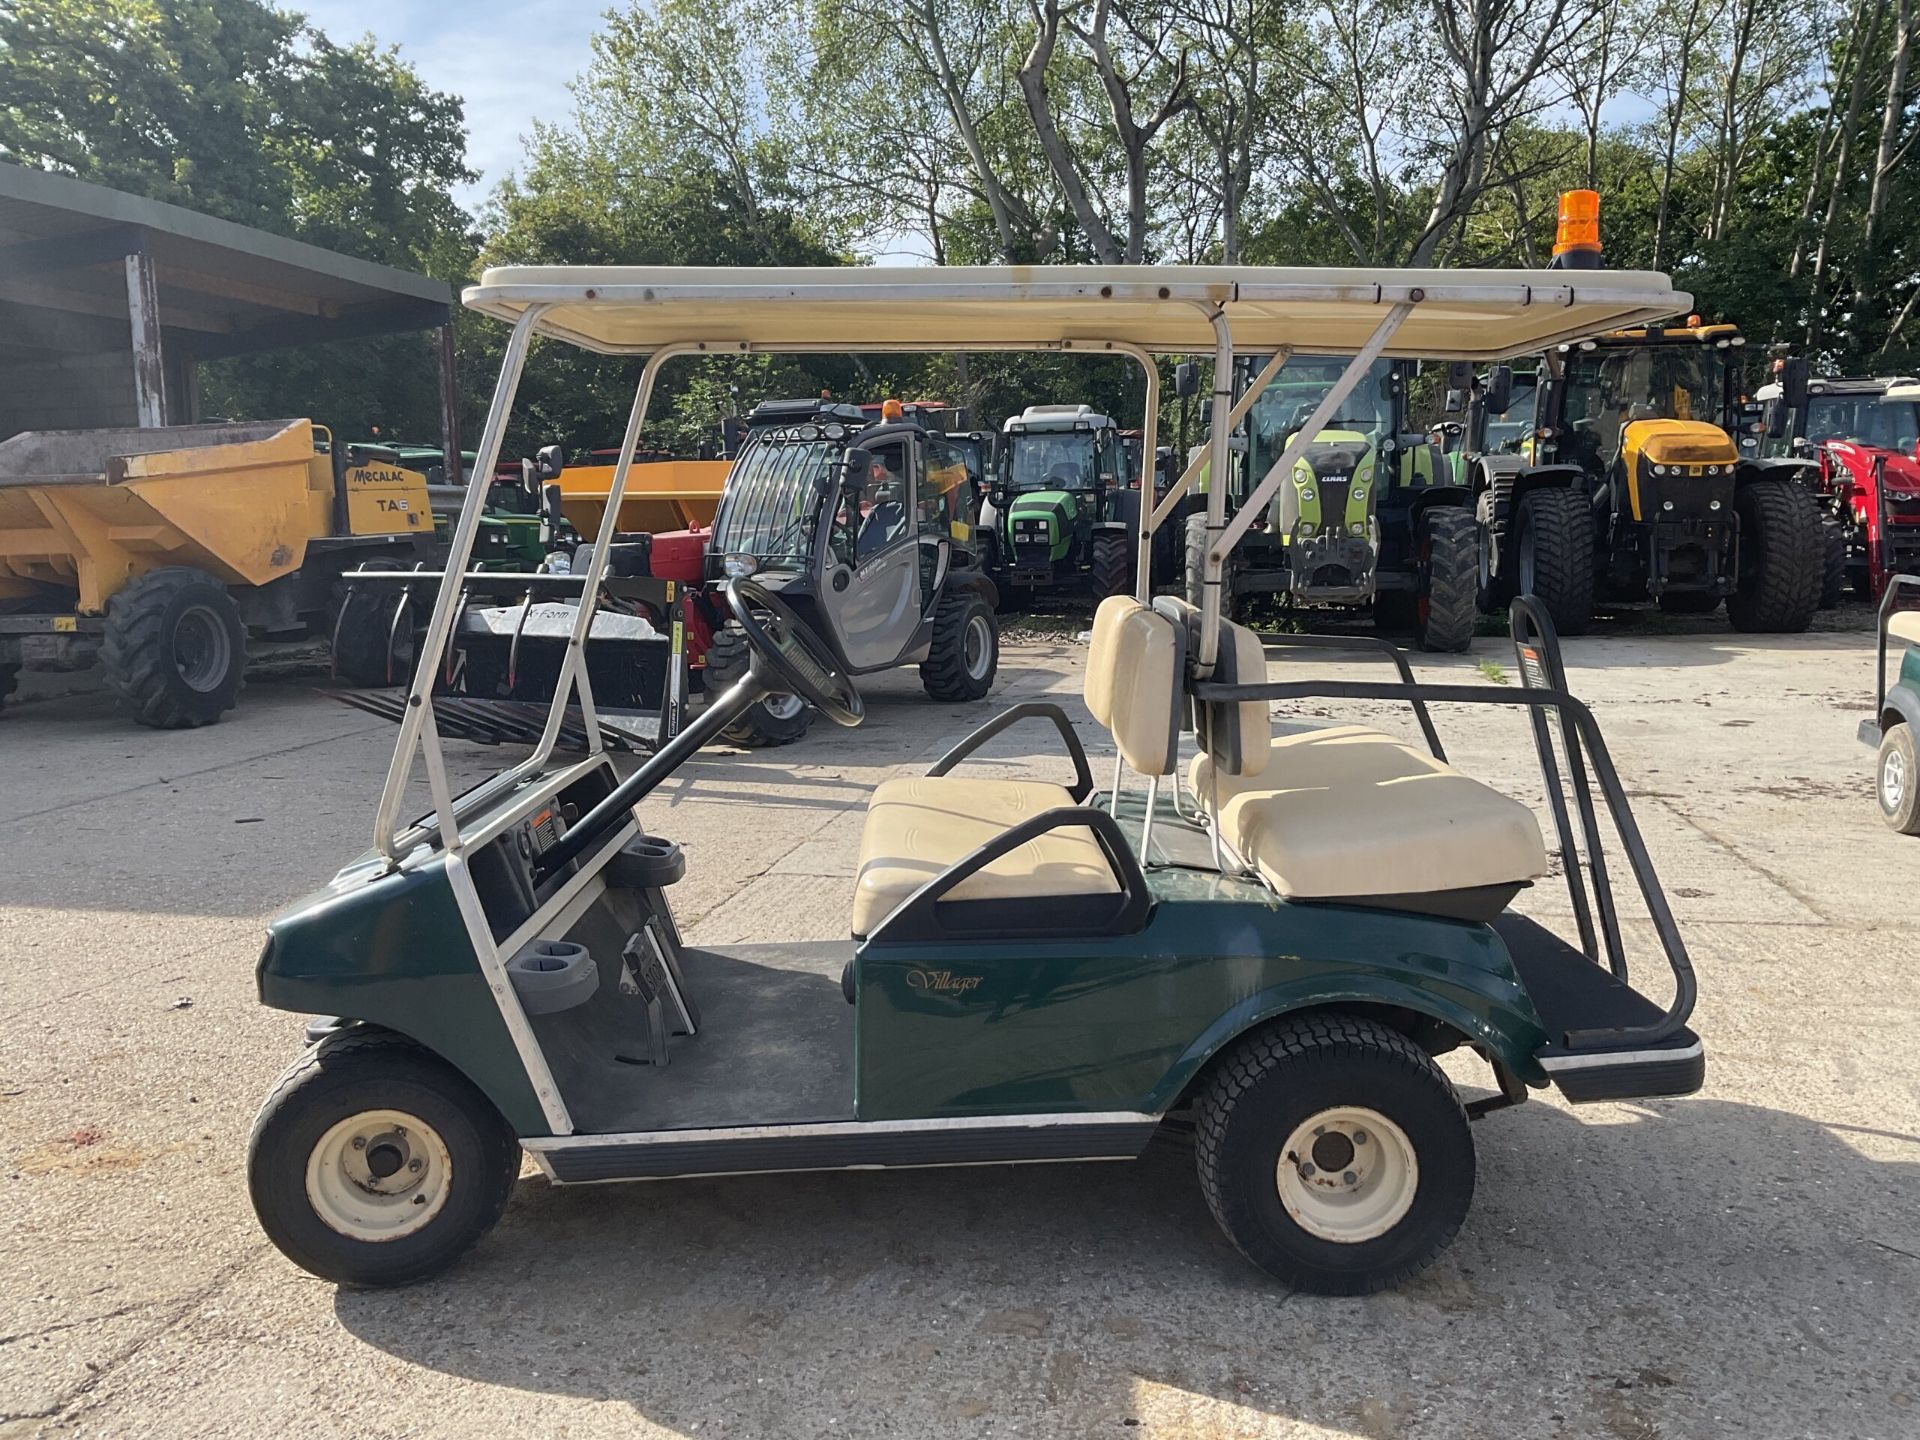 CLUB CAR VILLAGER GOLF BUGGY. PETROL. WINDSHIELD. 4 PASSENGERS. - Image 9 of 9